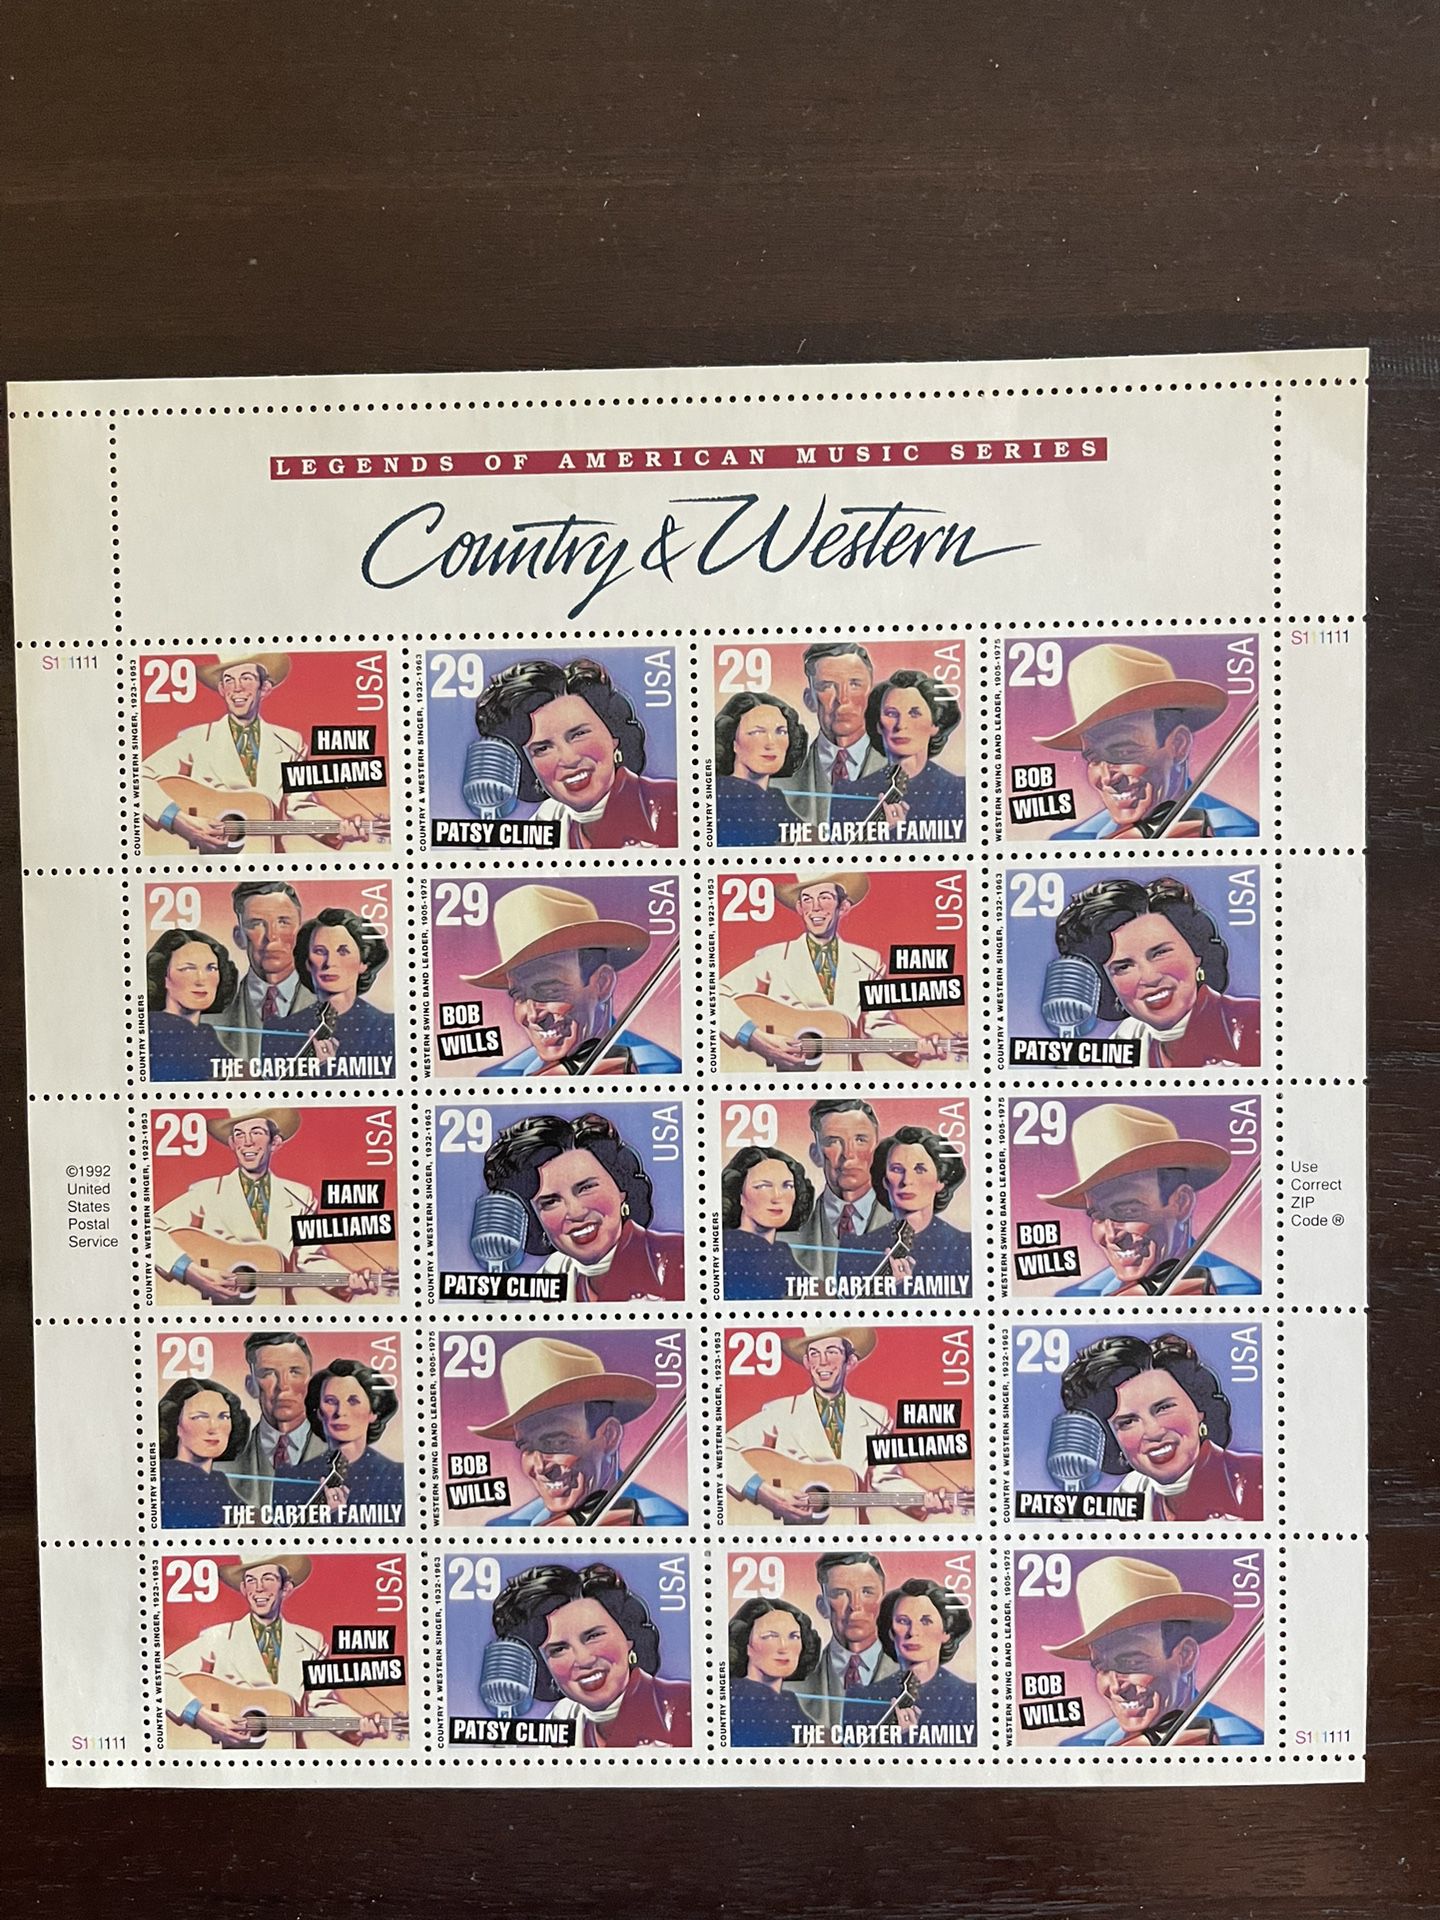 U.S. Postage Stamps. 2 Sheets Never Used. 1st Sheet Is 20 Stamps With Country & Western Singers. 2nd Sheet Are 40 Stamps Of Hank Williams. Mint. 